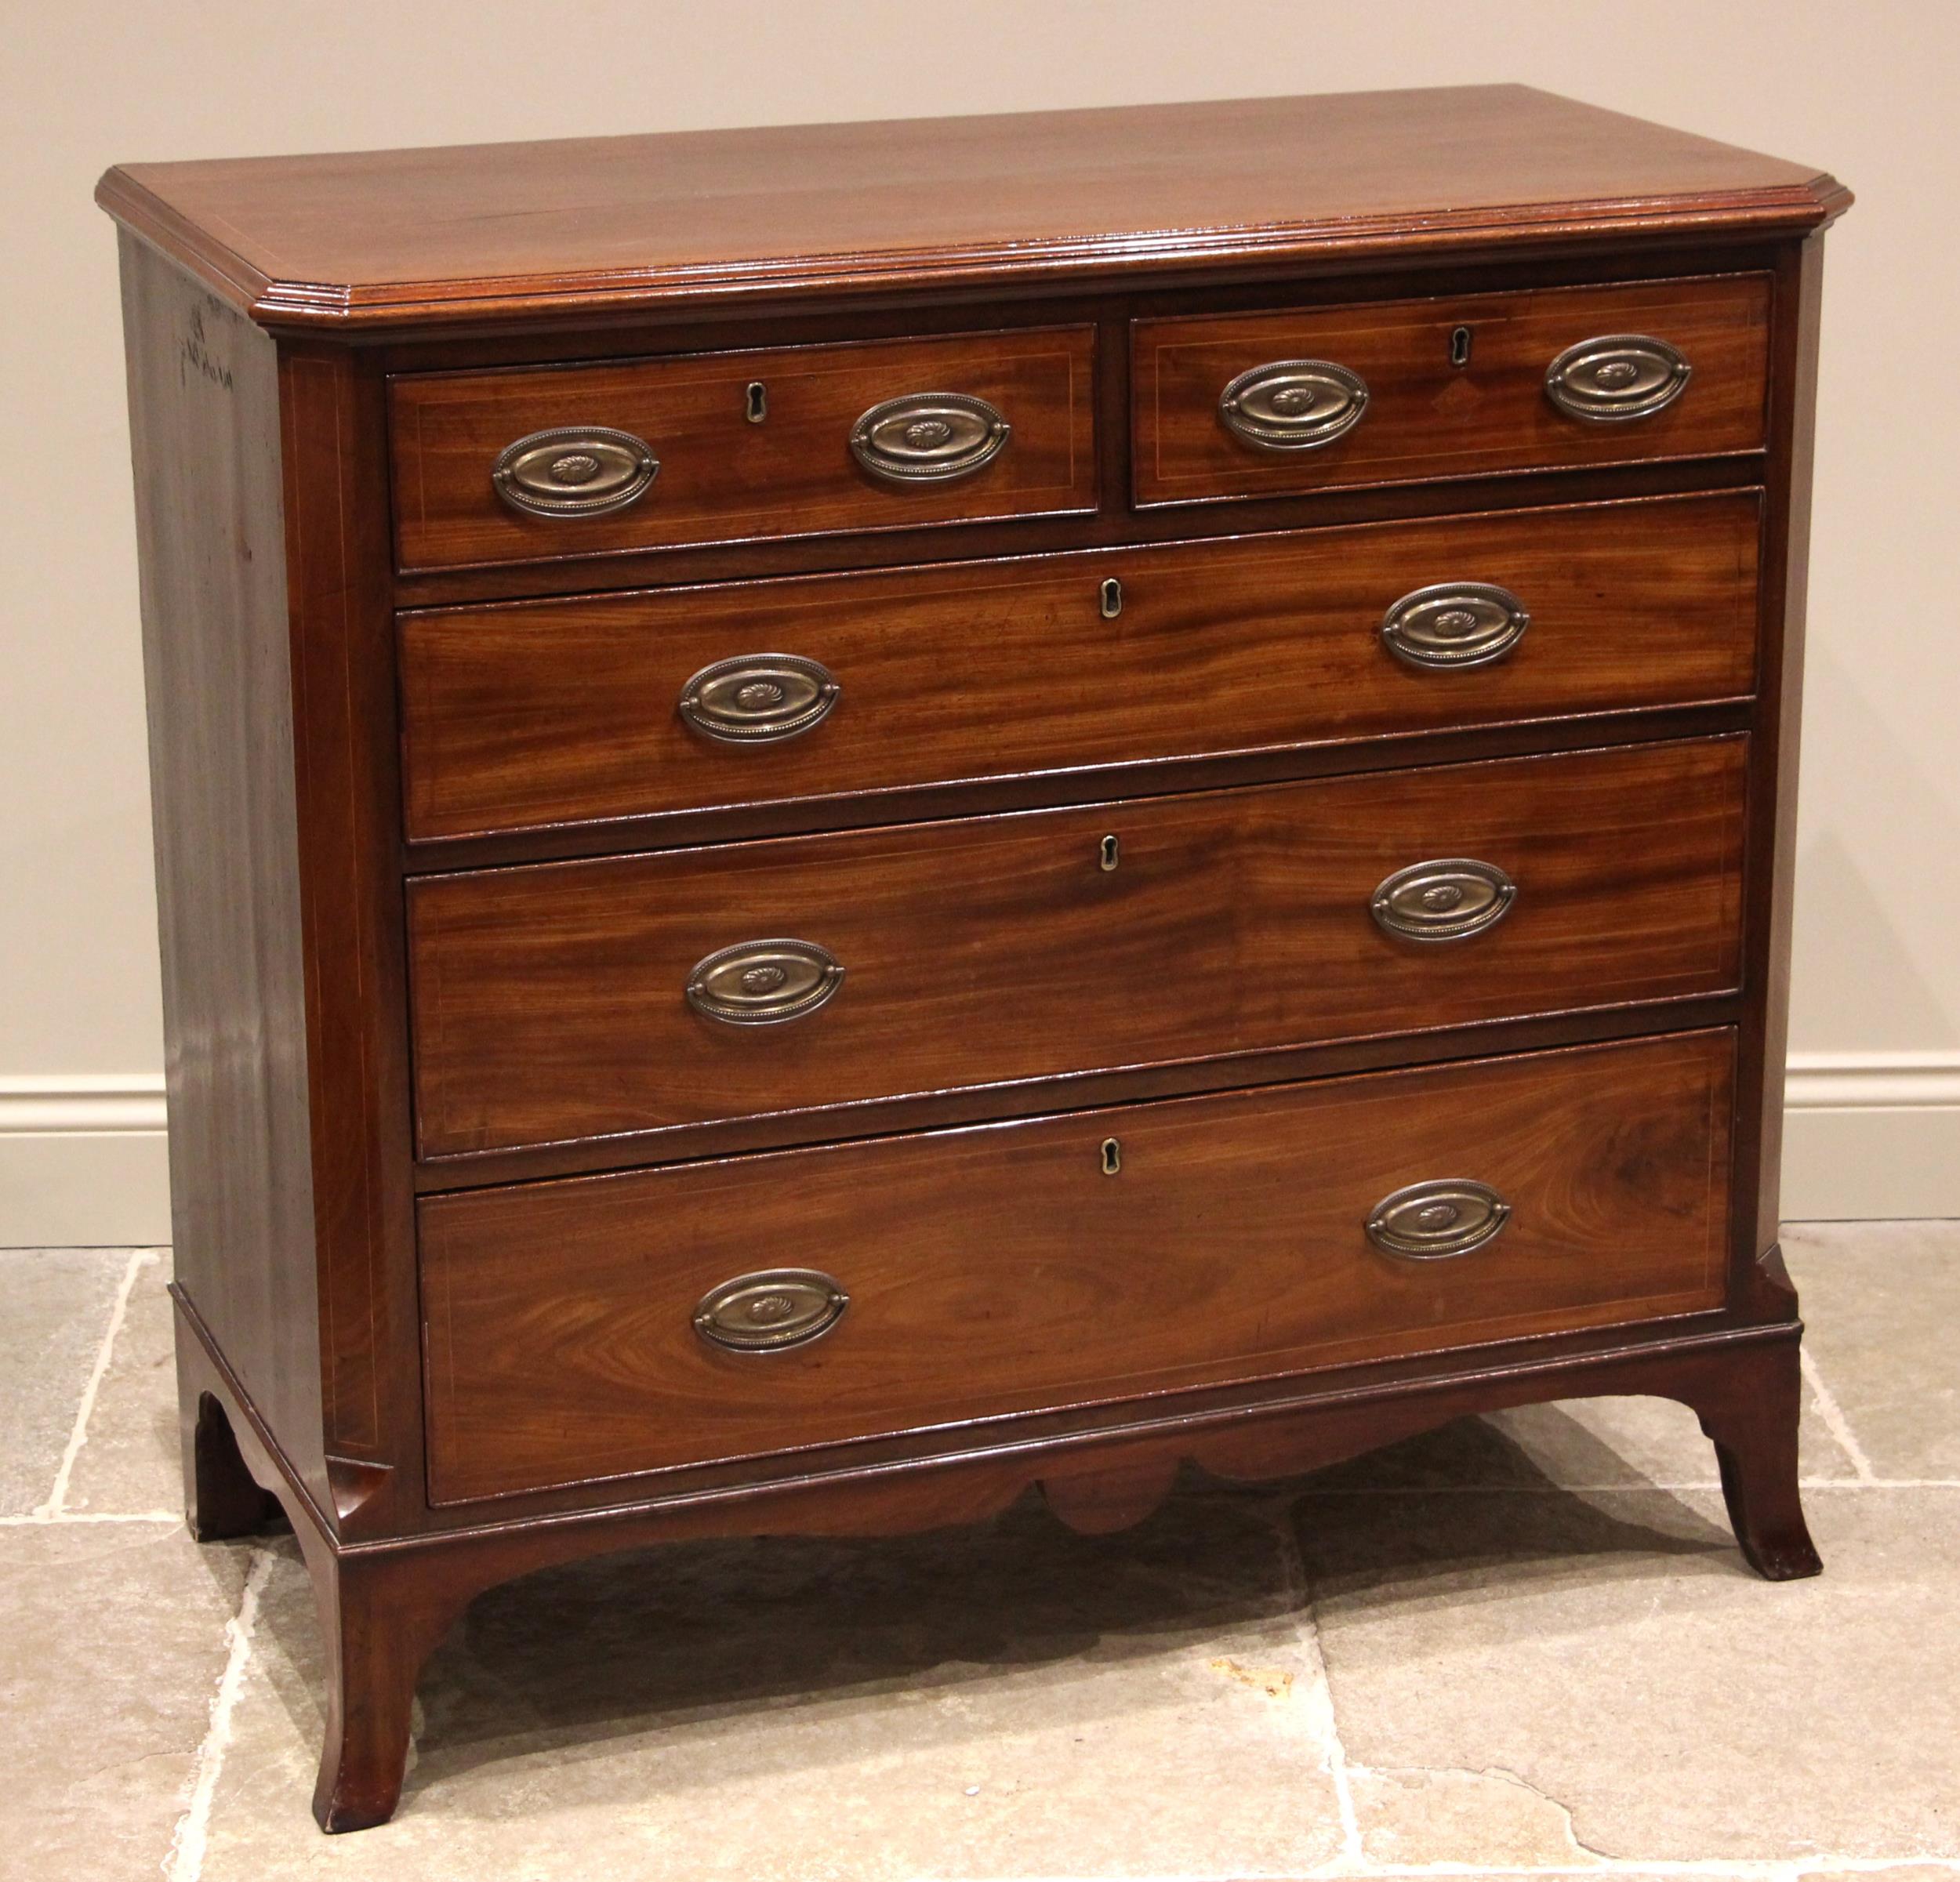 An early 19th century mahogany chest of drawers, the rectangular moulded top with canted front